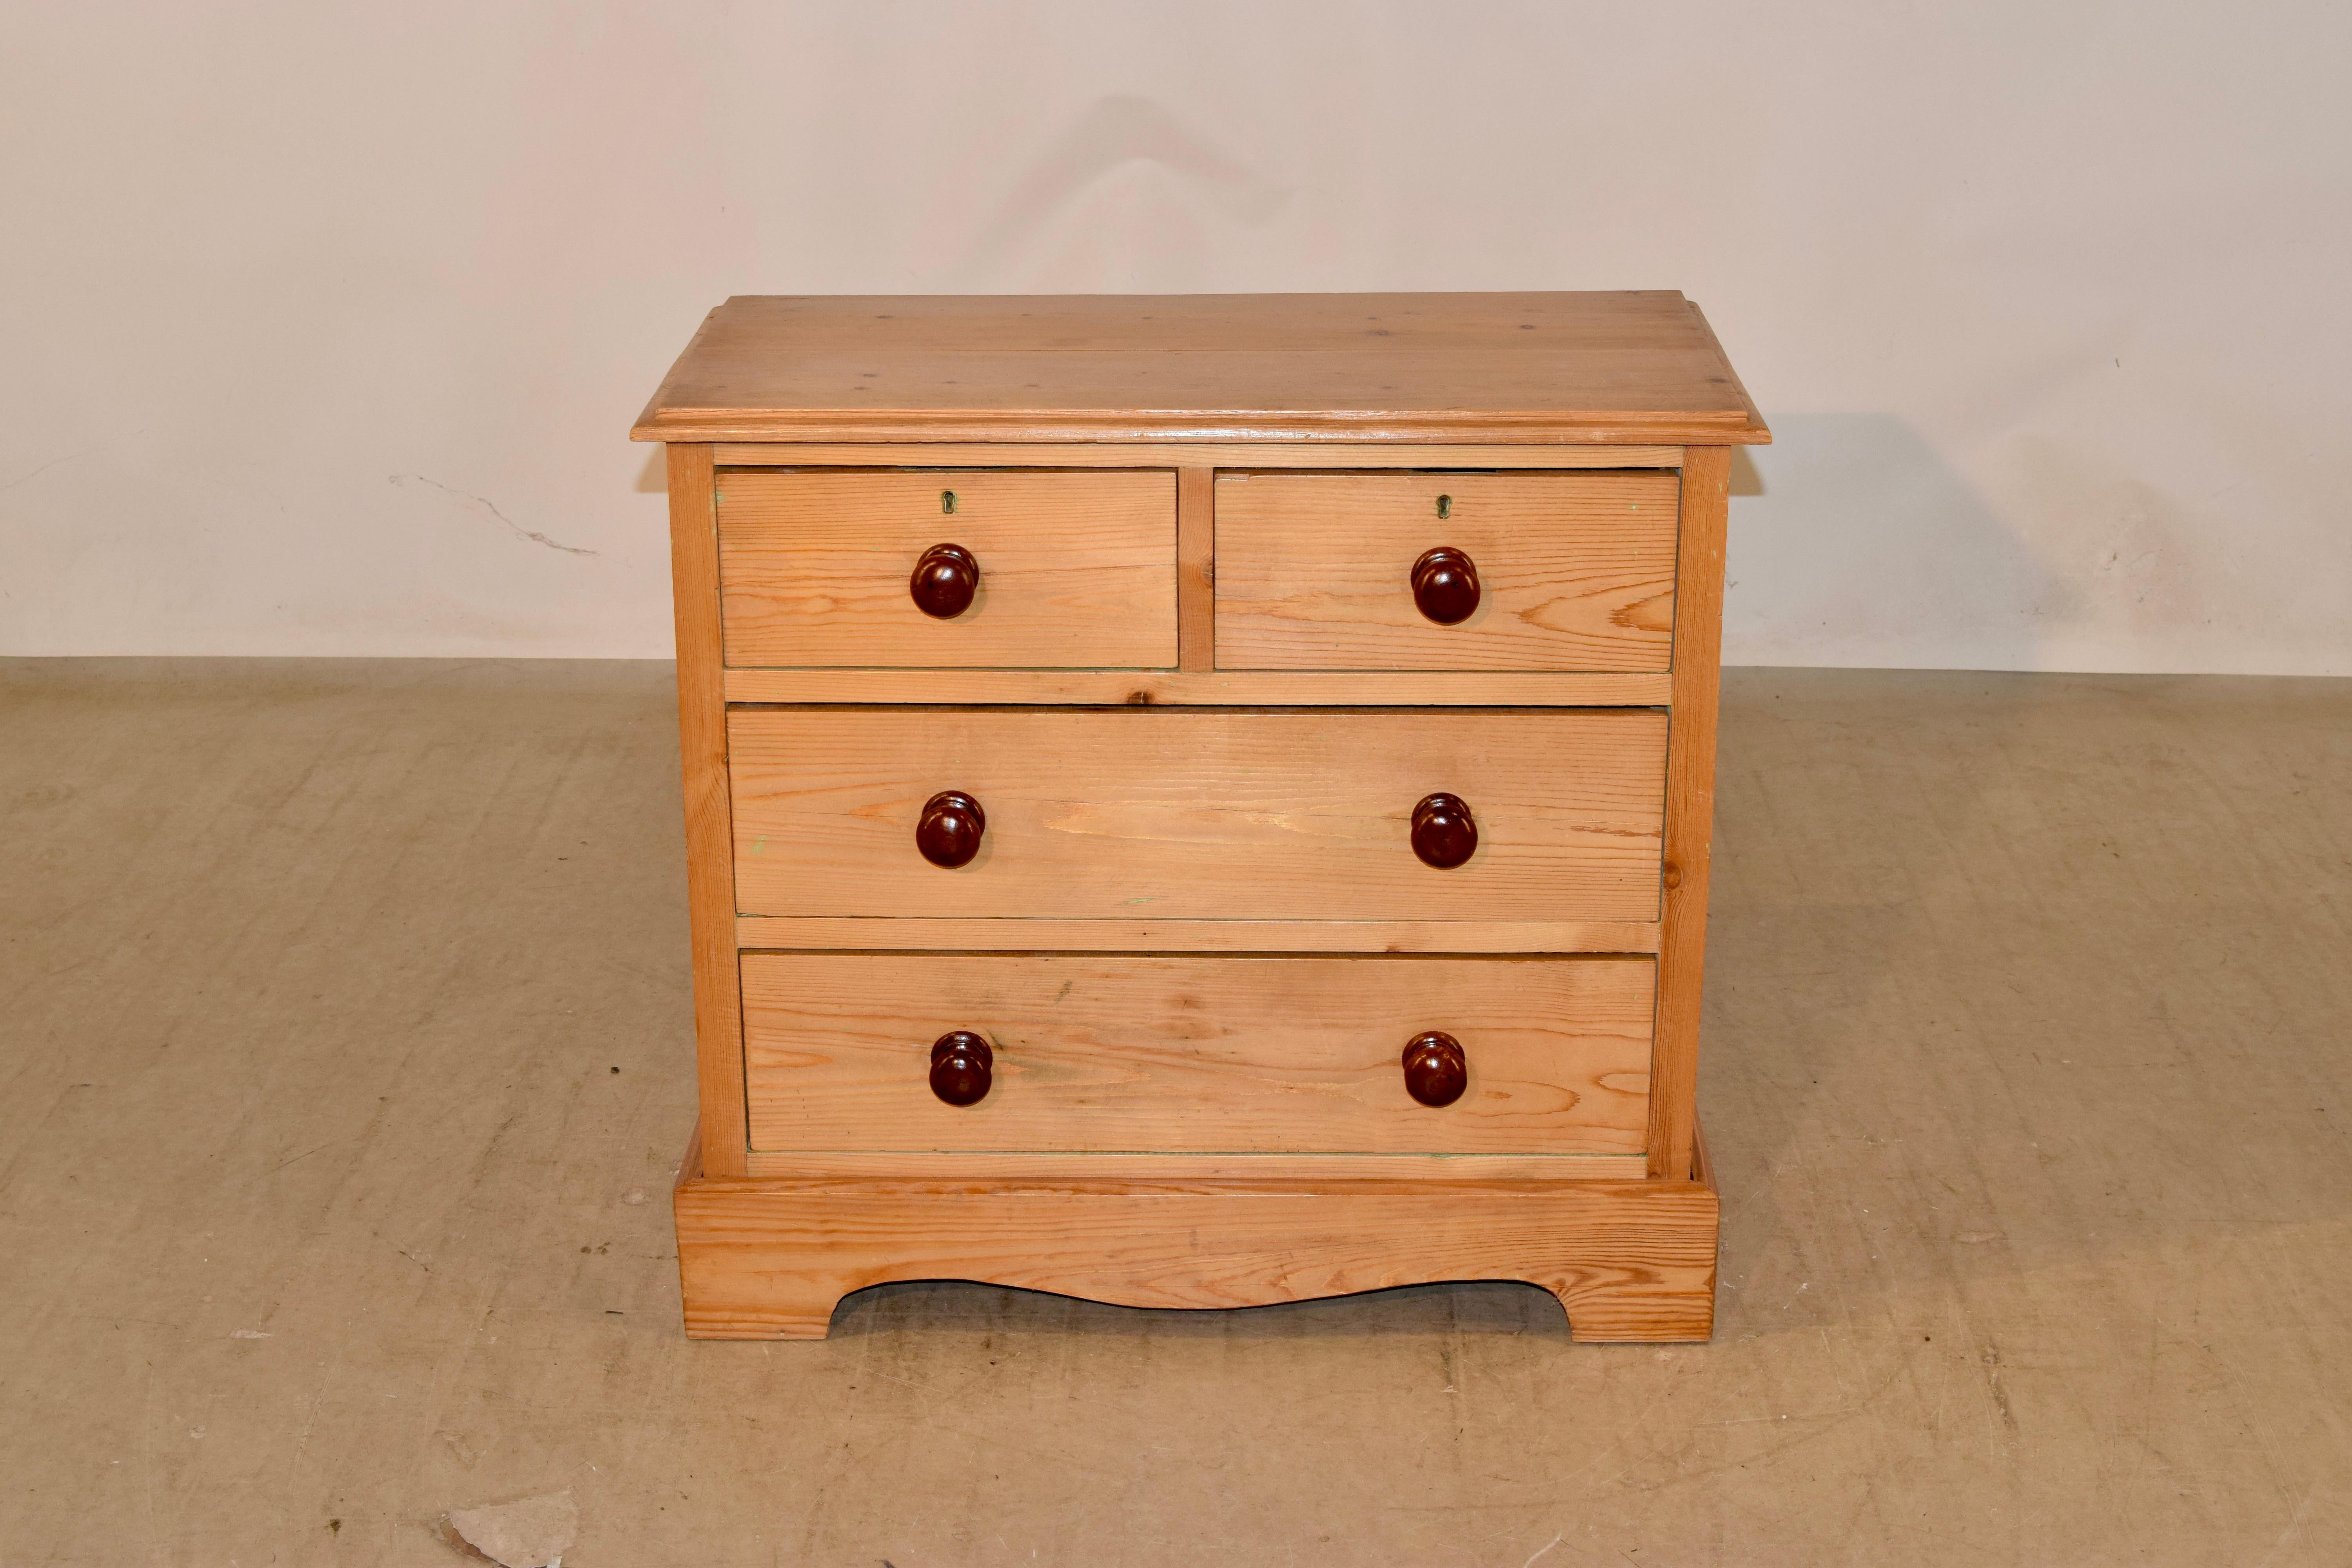 19th century small pine chest of drawers from England with a stacked beveled edge around the top. The case has simple paneled sides and contains two over two drawers in the front, over a scalloped and banded base.